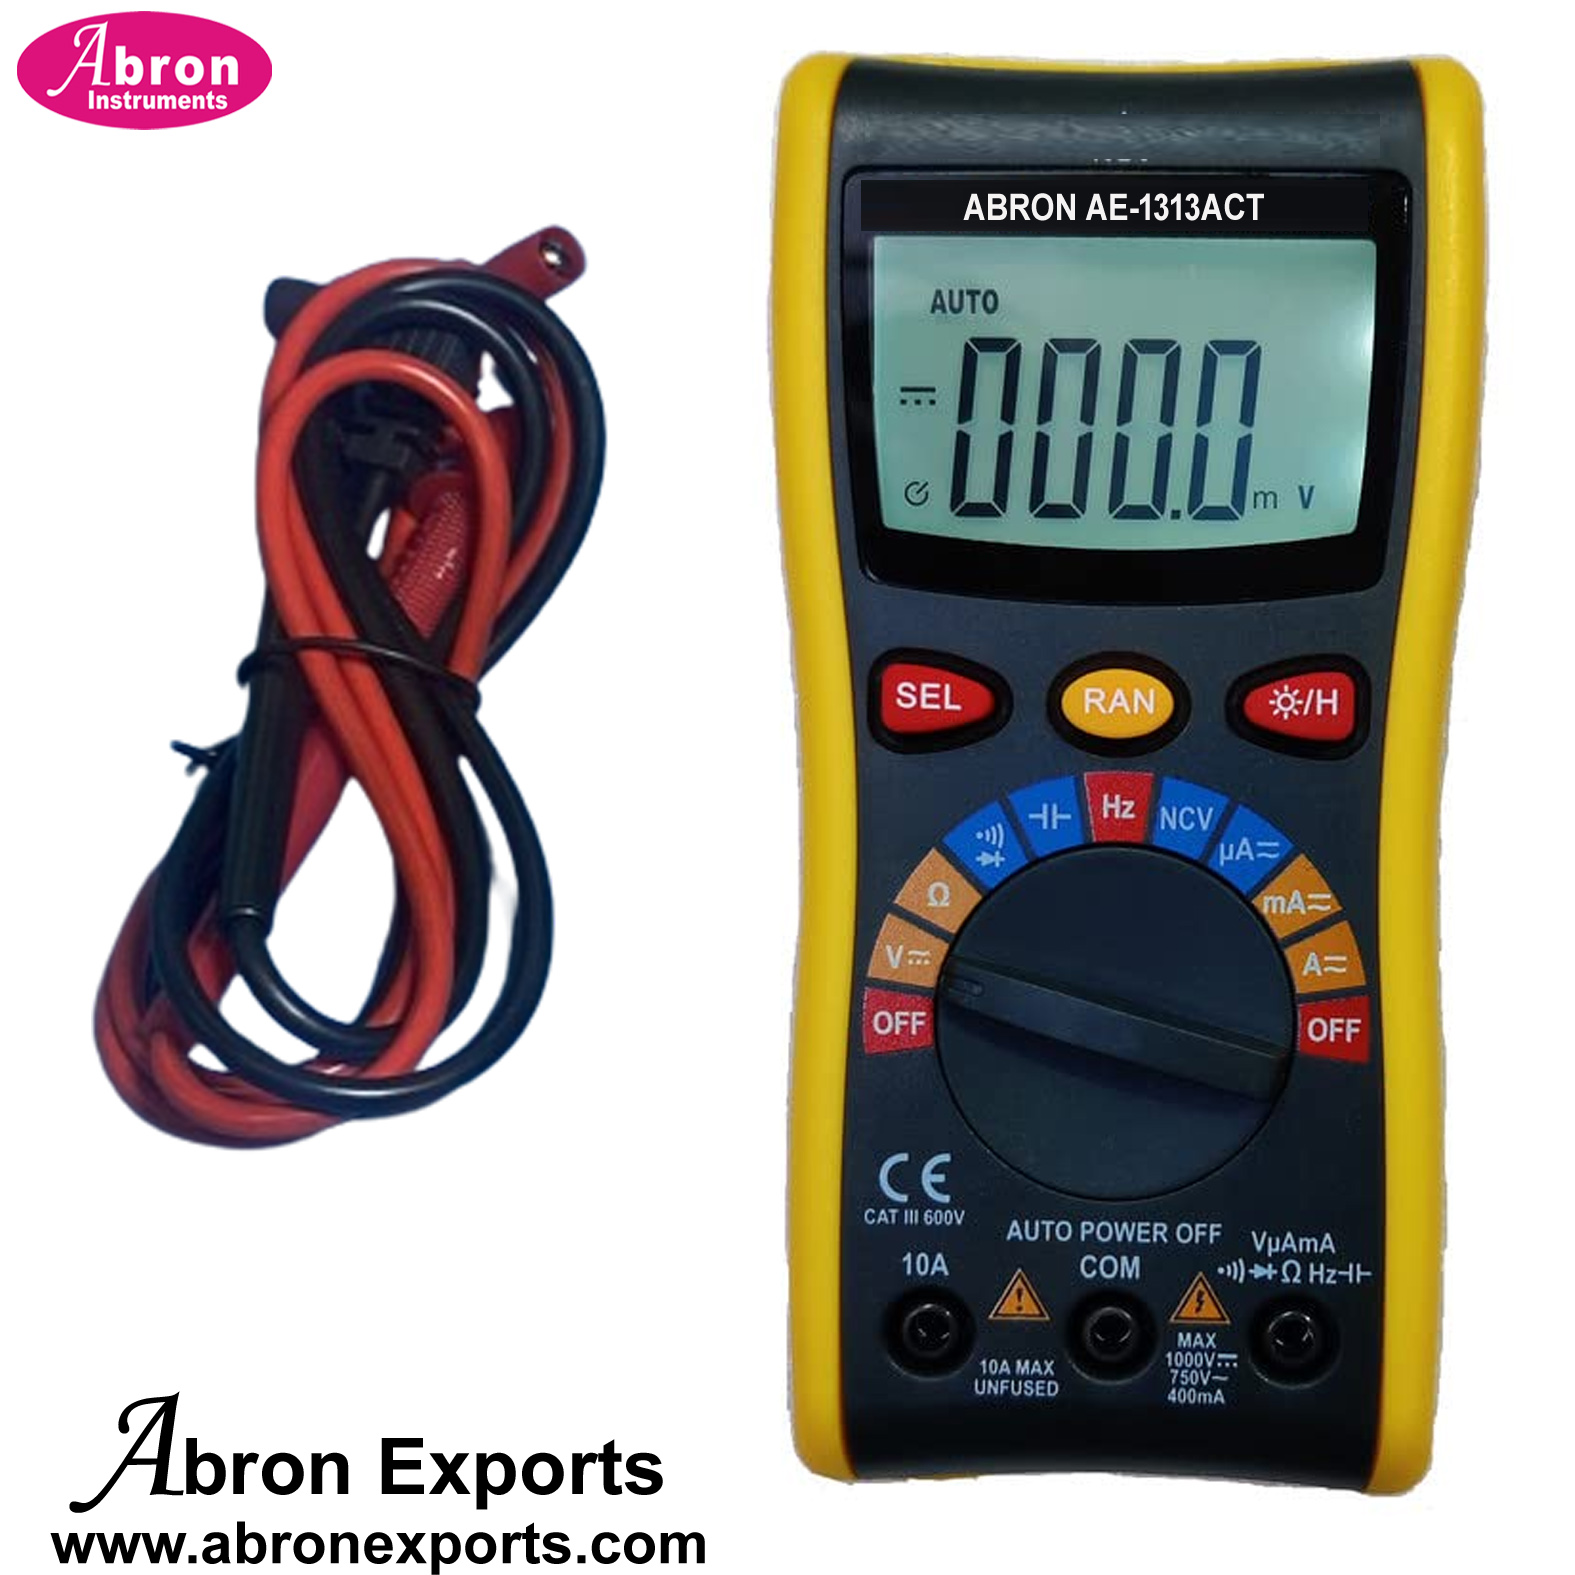 Multimeter 3.5 Digital Auto Range Temperature 6000Count 1000VDC 750VAC check Current Resistance Capacitance Frequency Hz Diode T RMD Continuity Data Hold Backlight Abron AE-1313ACT 